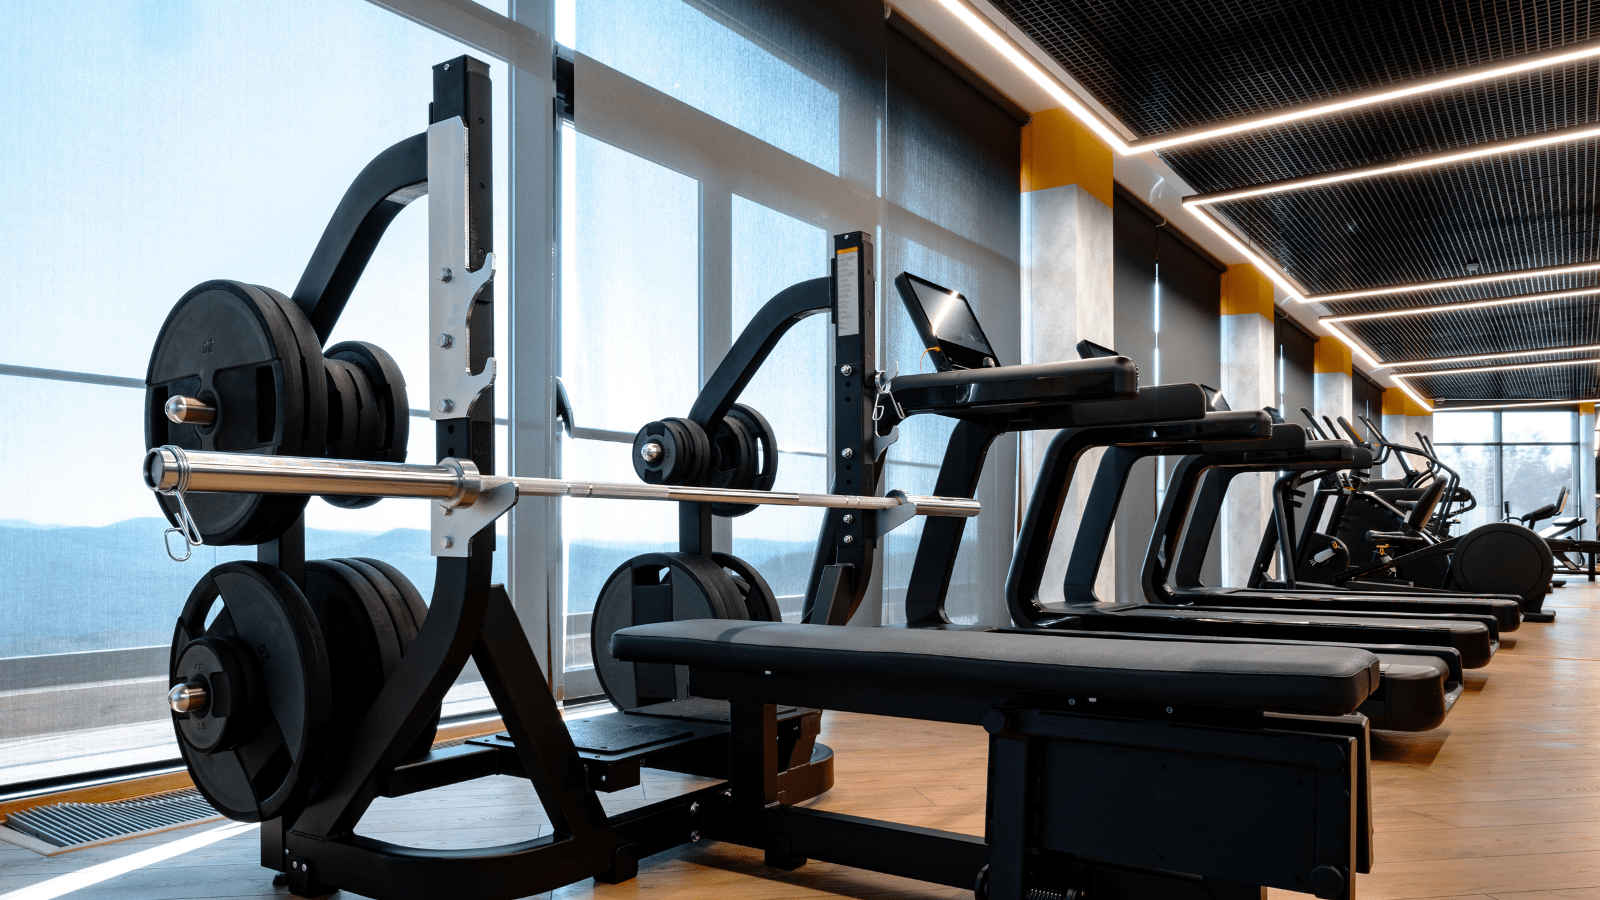 Best Arm Exercise Equipment & Machines - Best Used Gym Equipment